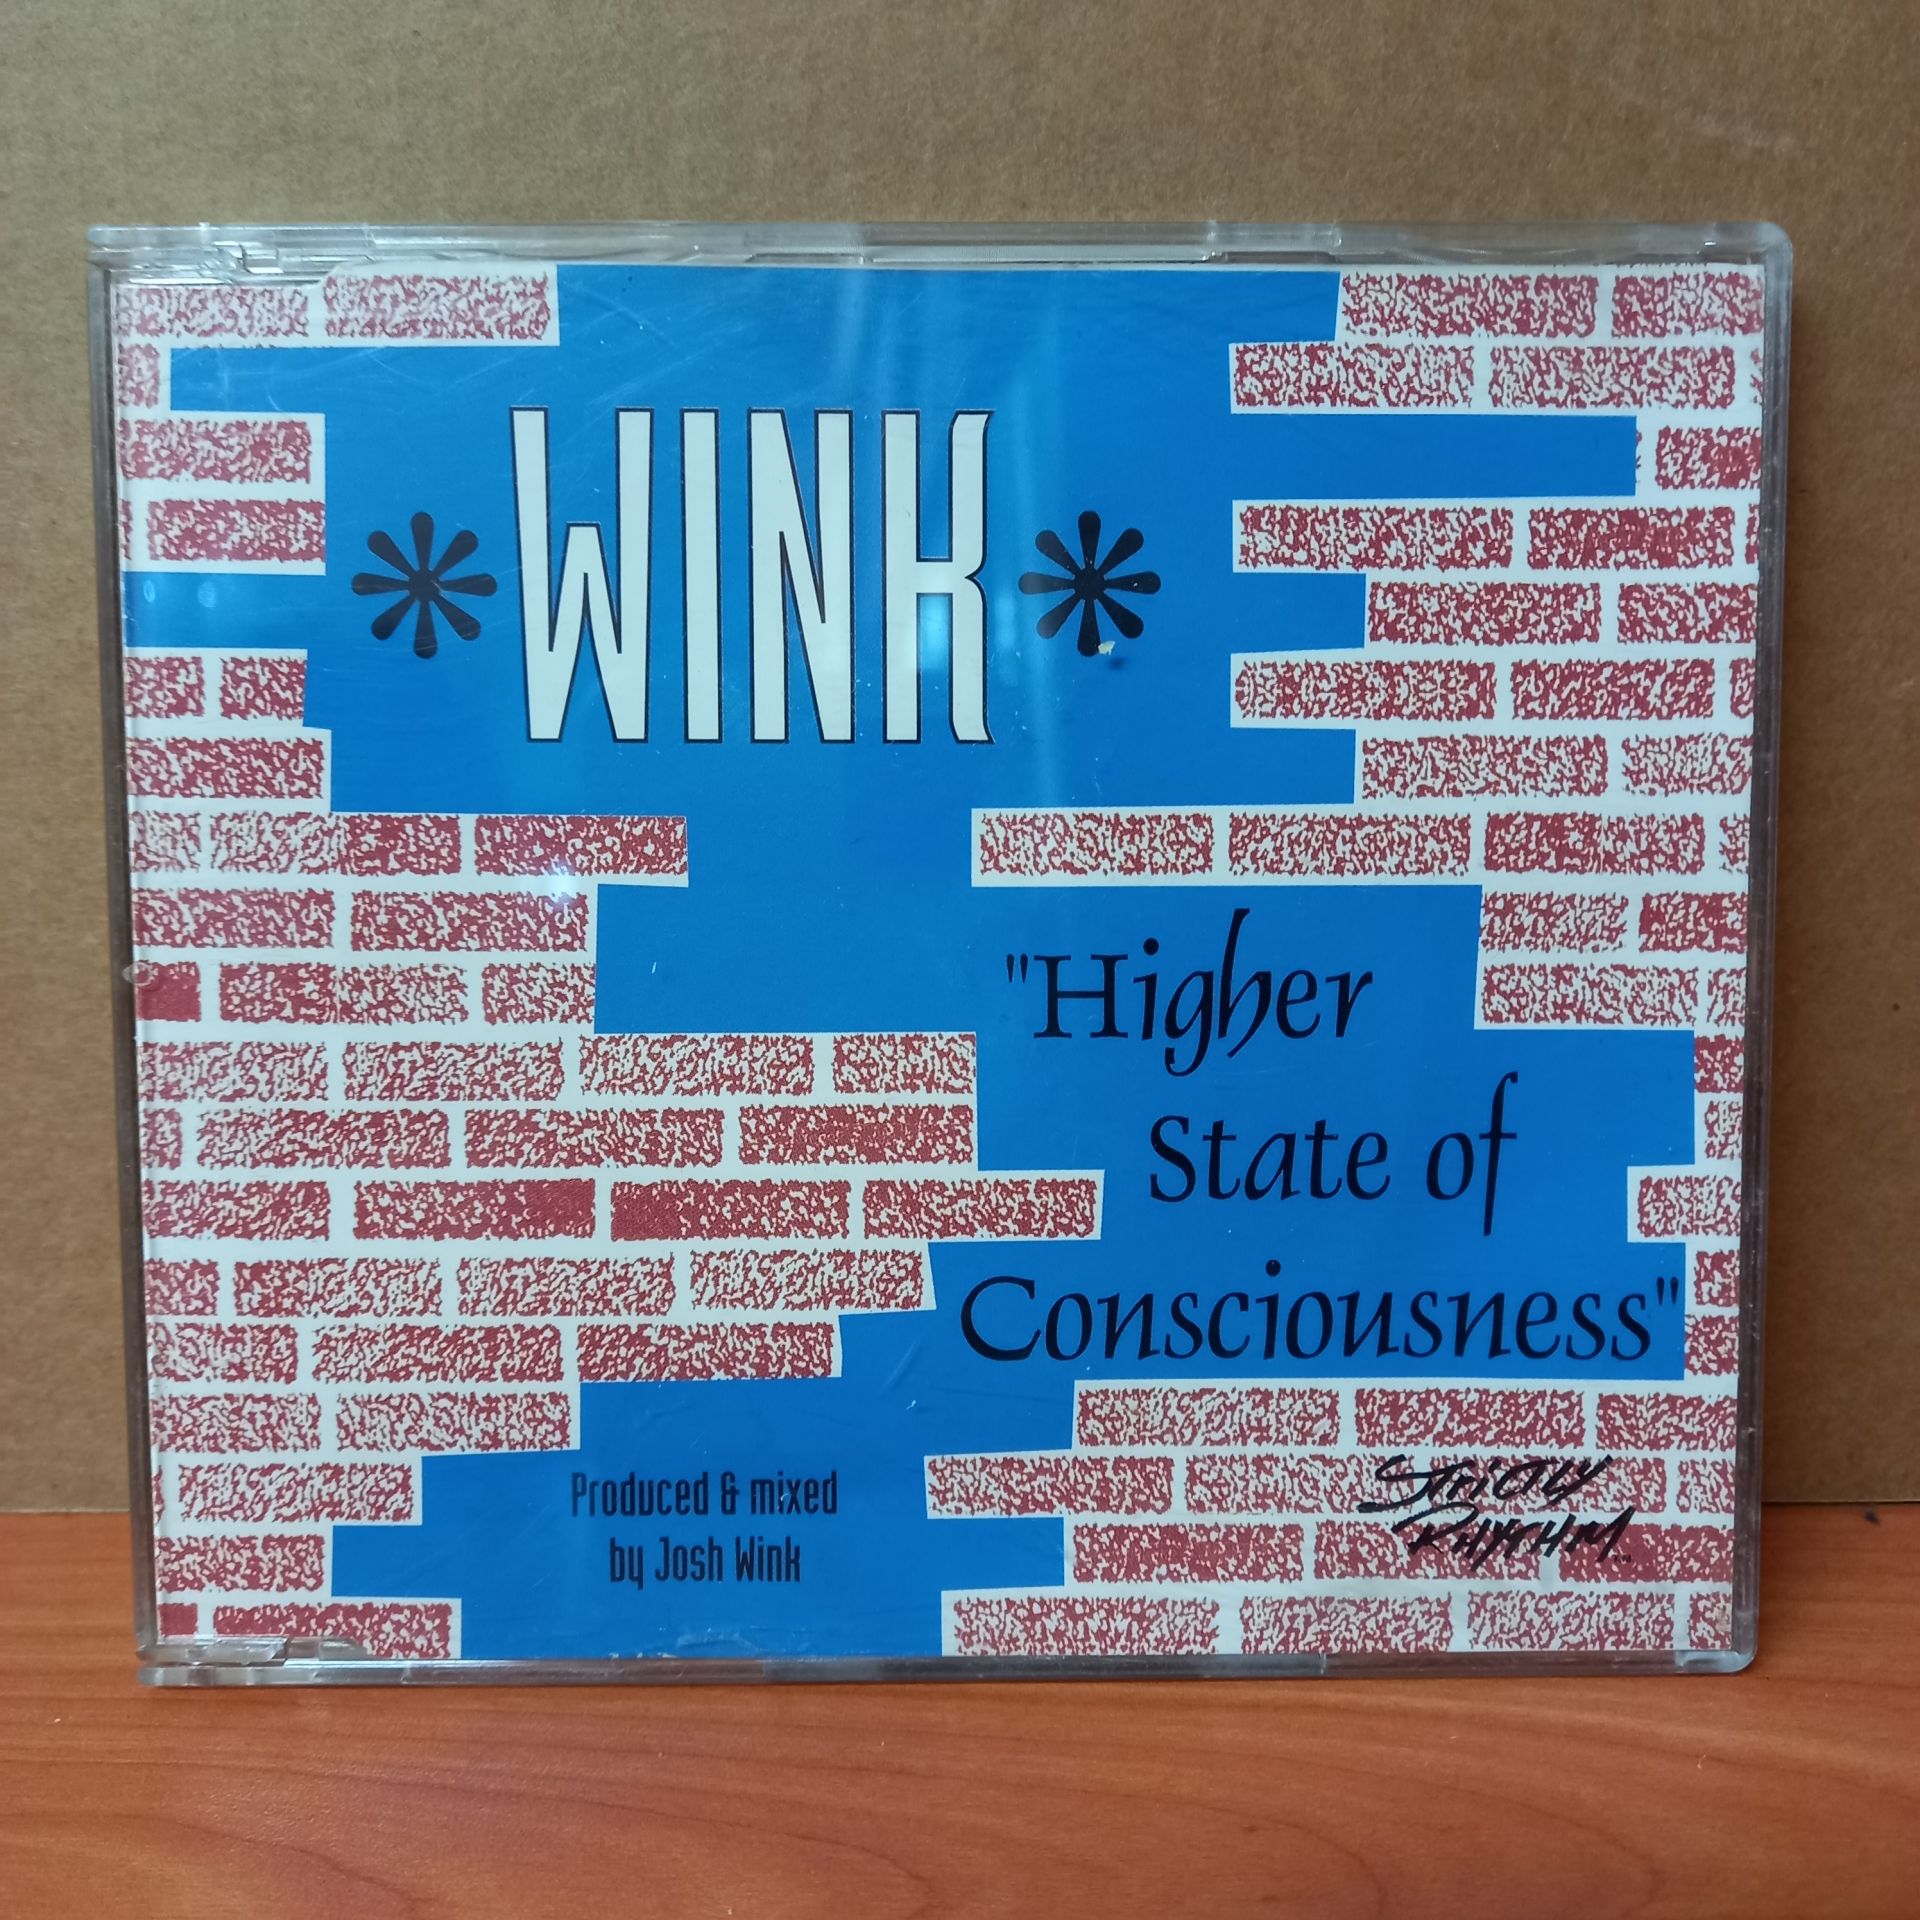 WINK - HIGHER STATE OF CONSCIOUSNESS (1995) - CD SINGLE 2.EL